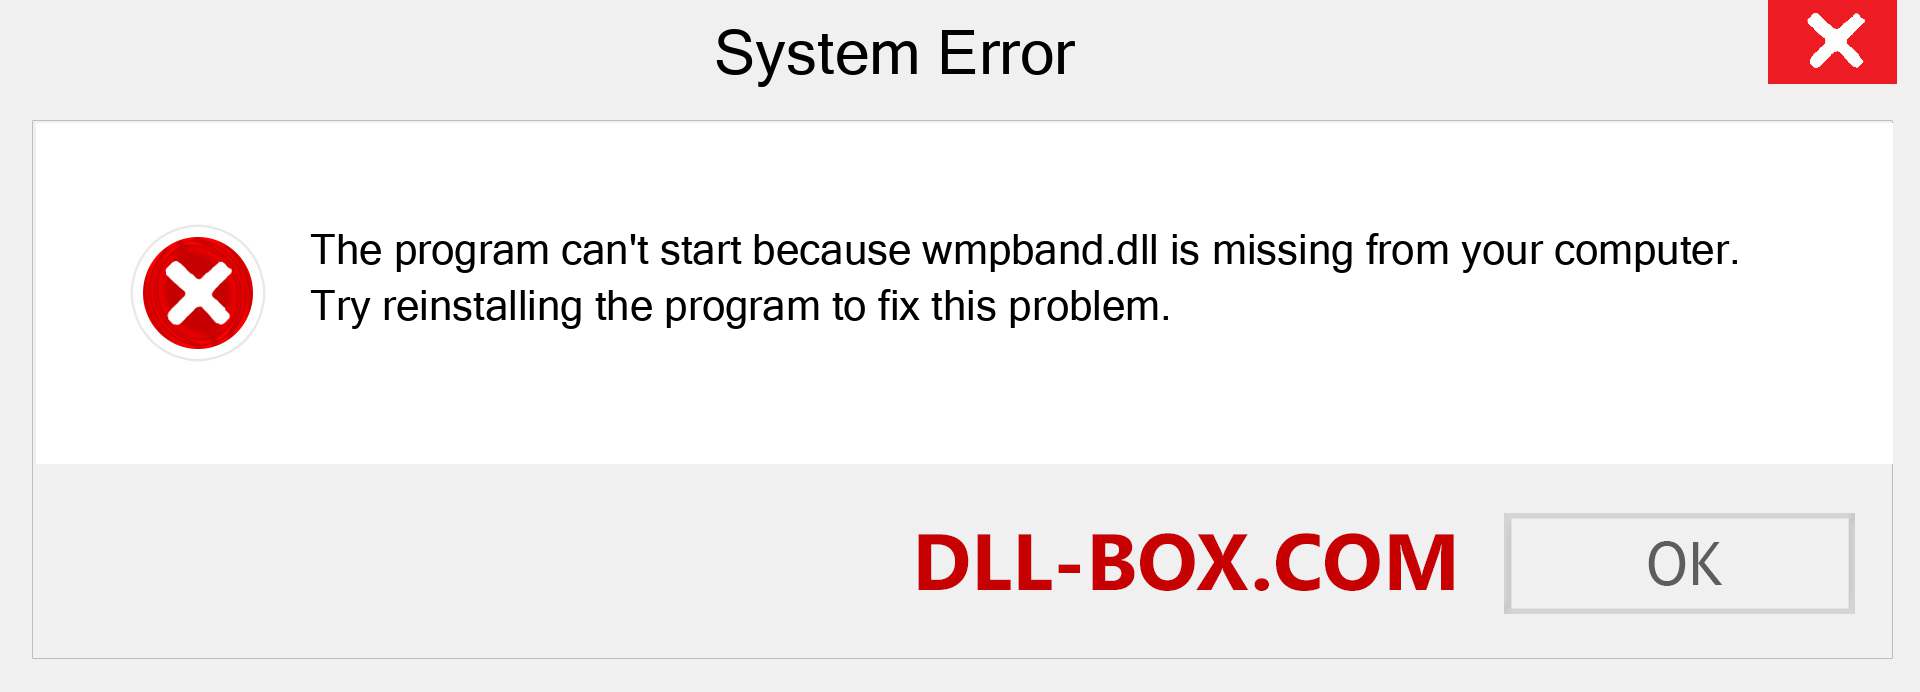  wmpband.dll file is missing?. Download for Windows 7, 8, 10 - Fix  wmpband dll Missing Error on Windows, photos, images